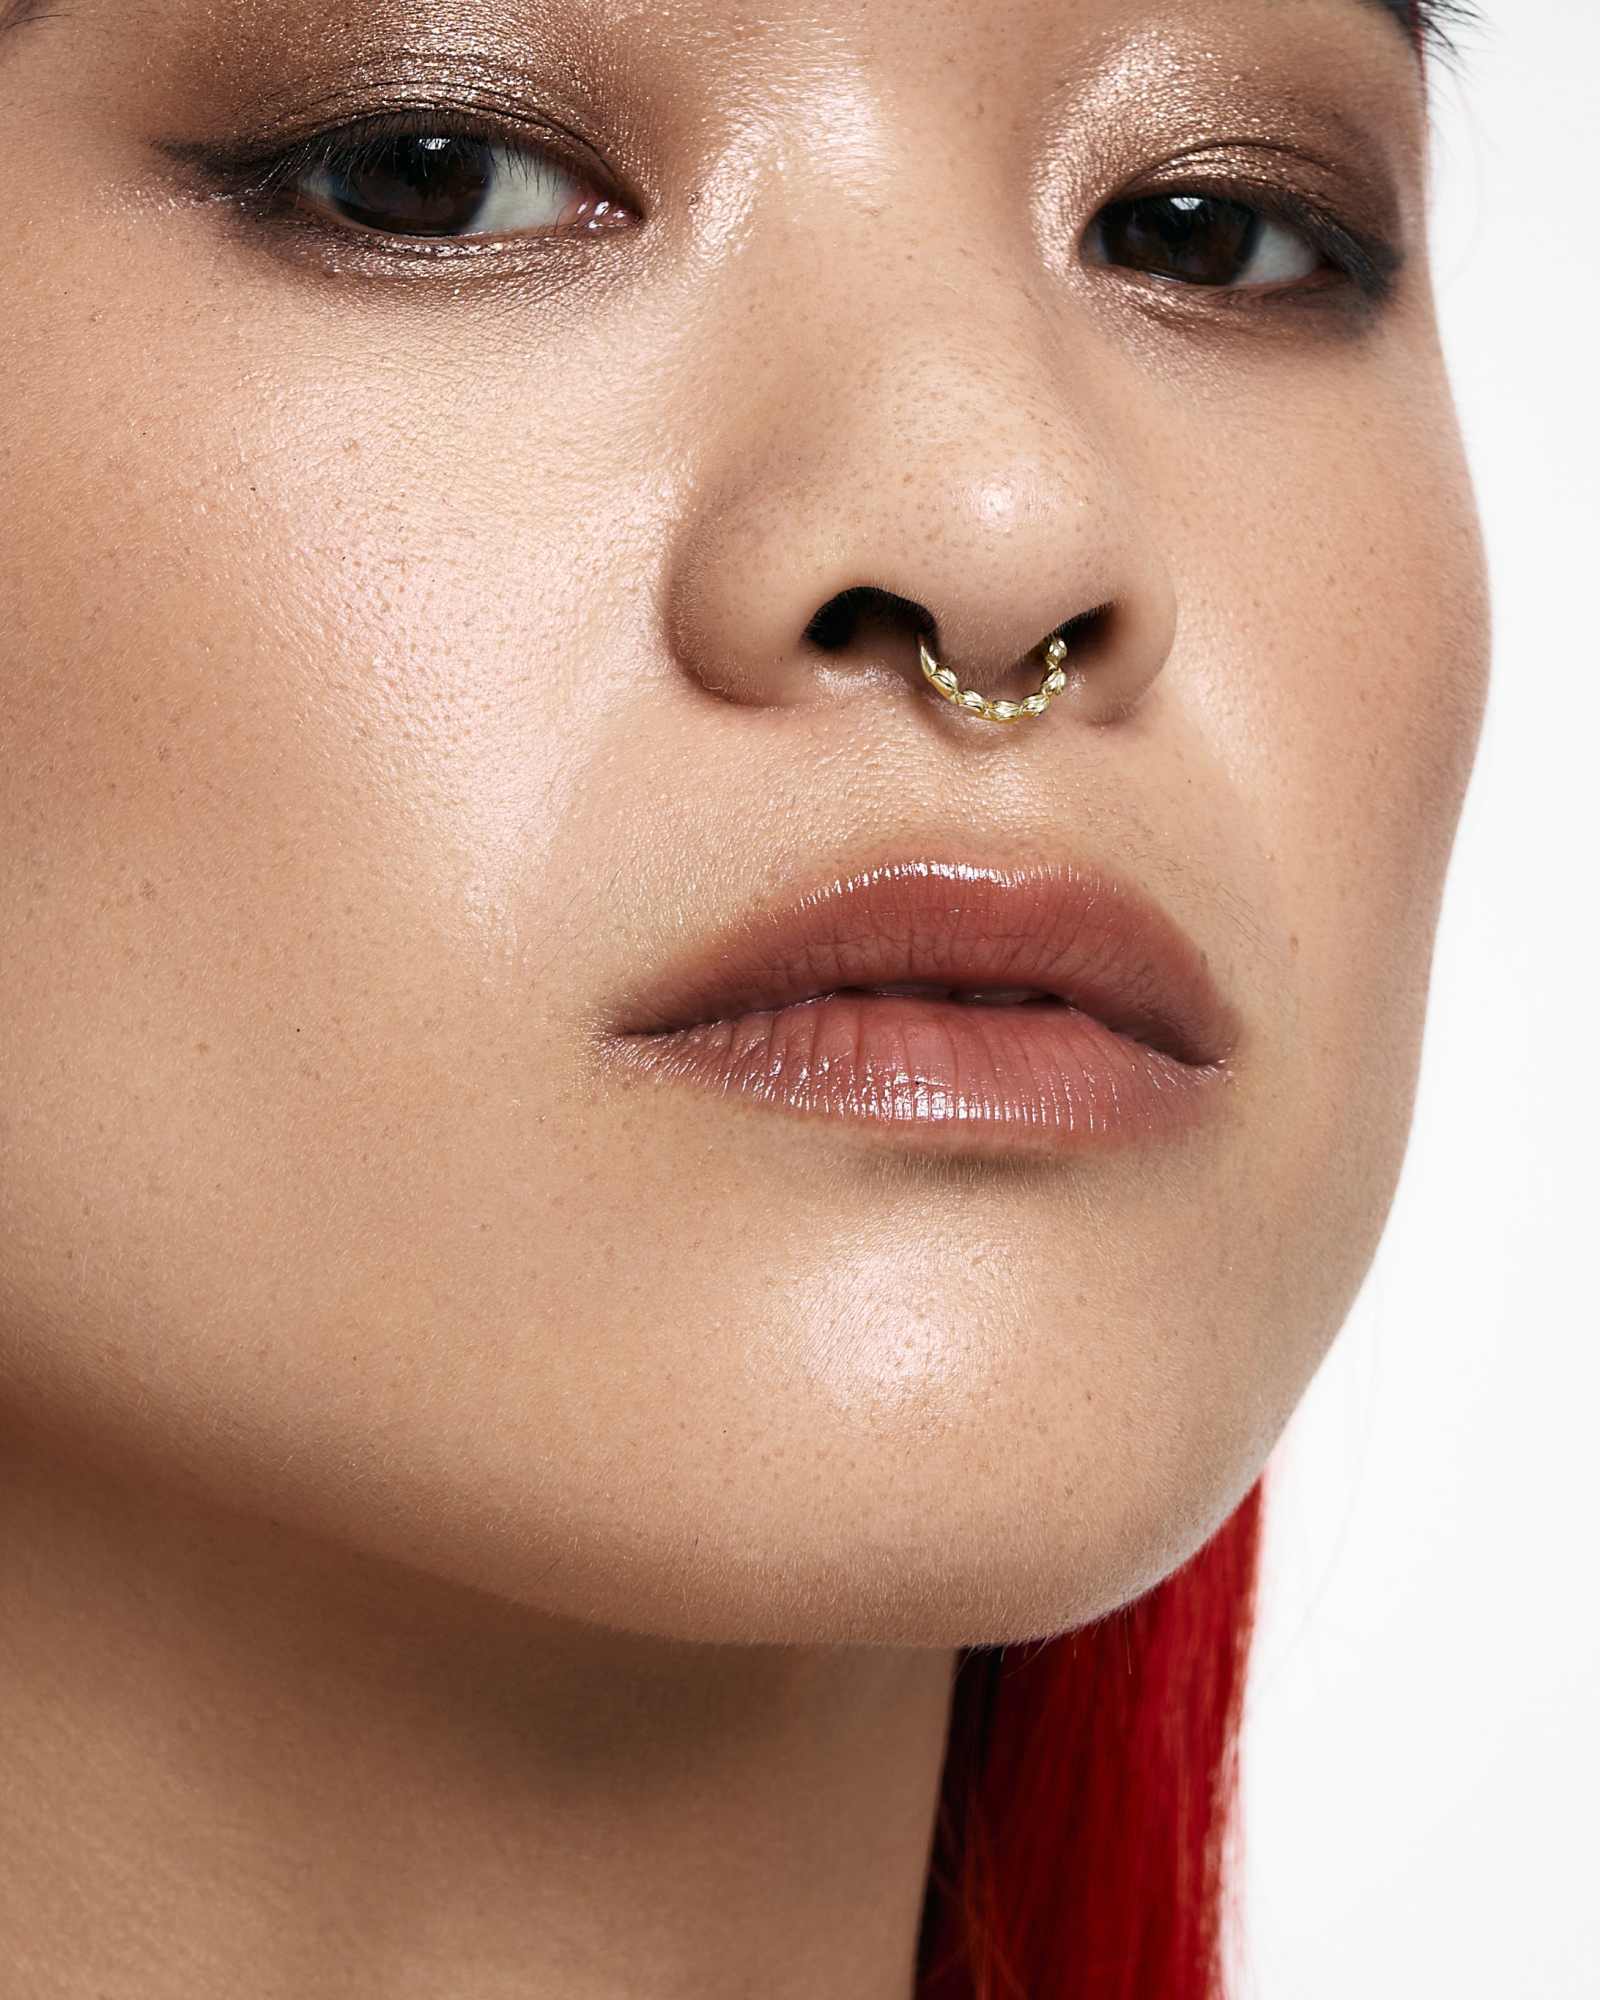 Buy 16g Minimalist Nose Ring 6mm 8mm Septum Piercing, Gold, Rose-gold,  Silver Septum Ring Clicker Hoop 316L Surgical Steel Online in India - Etsy